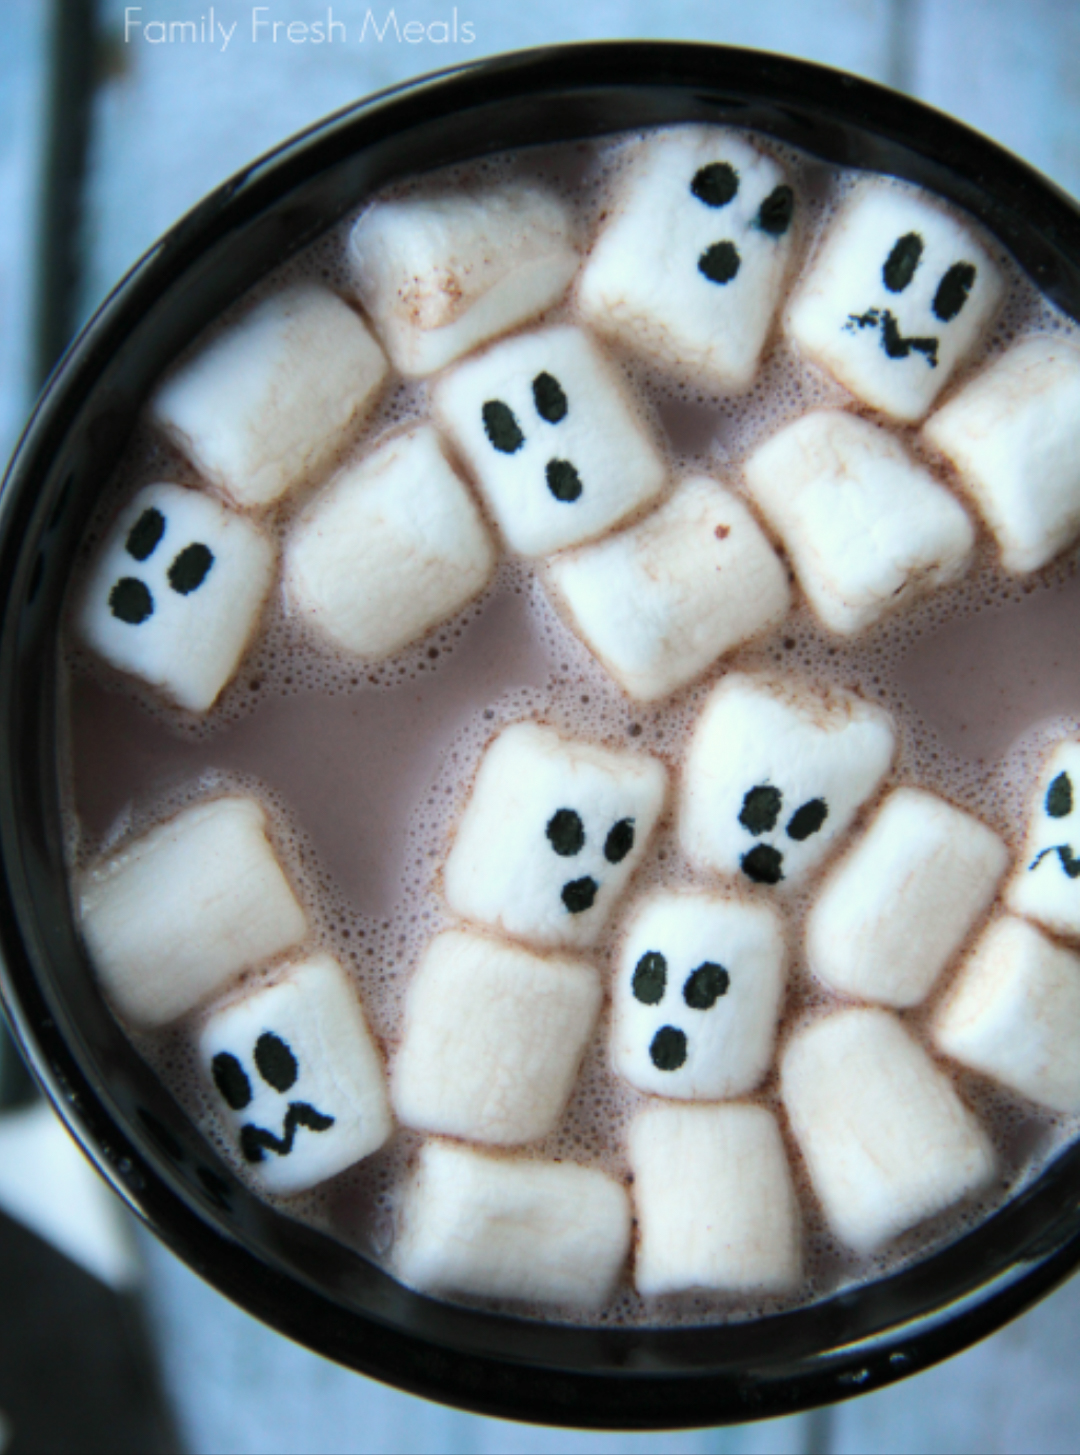 Marshmallows with ghost faces in hot cocoa as a scary Halloween drink.